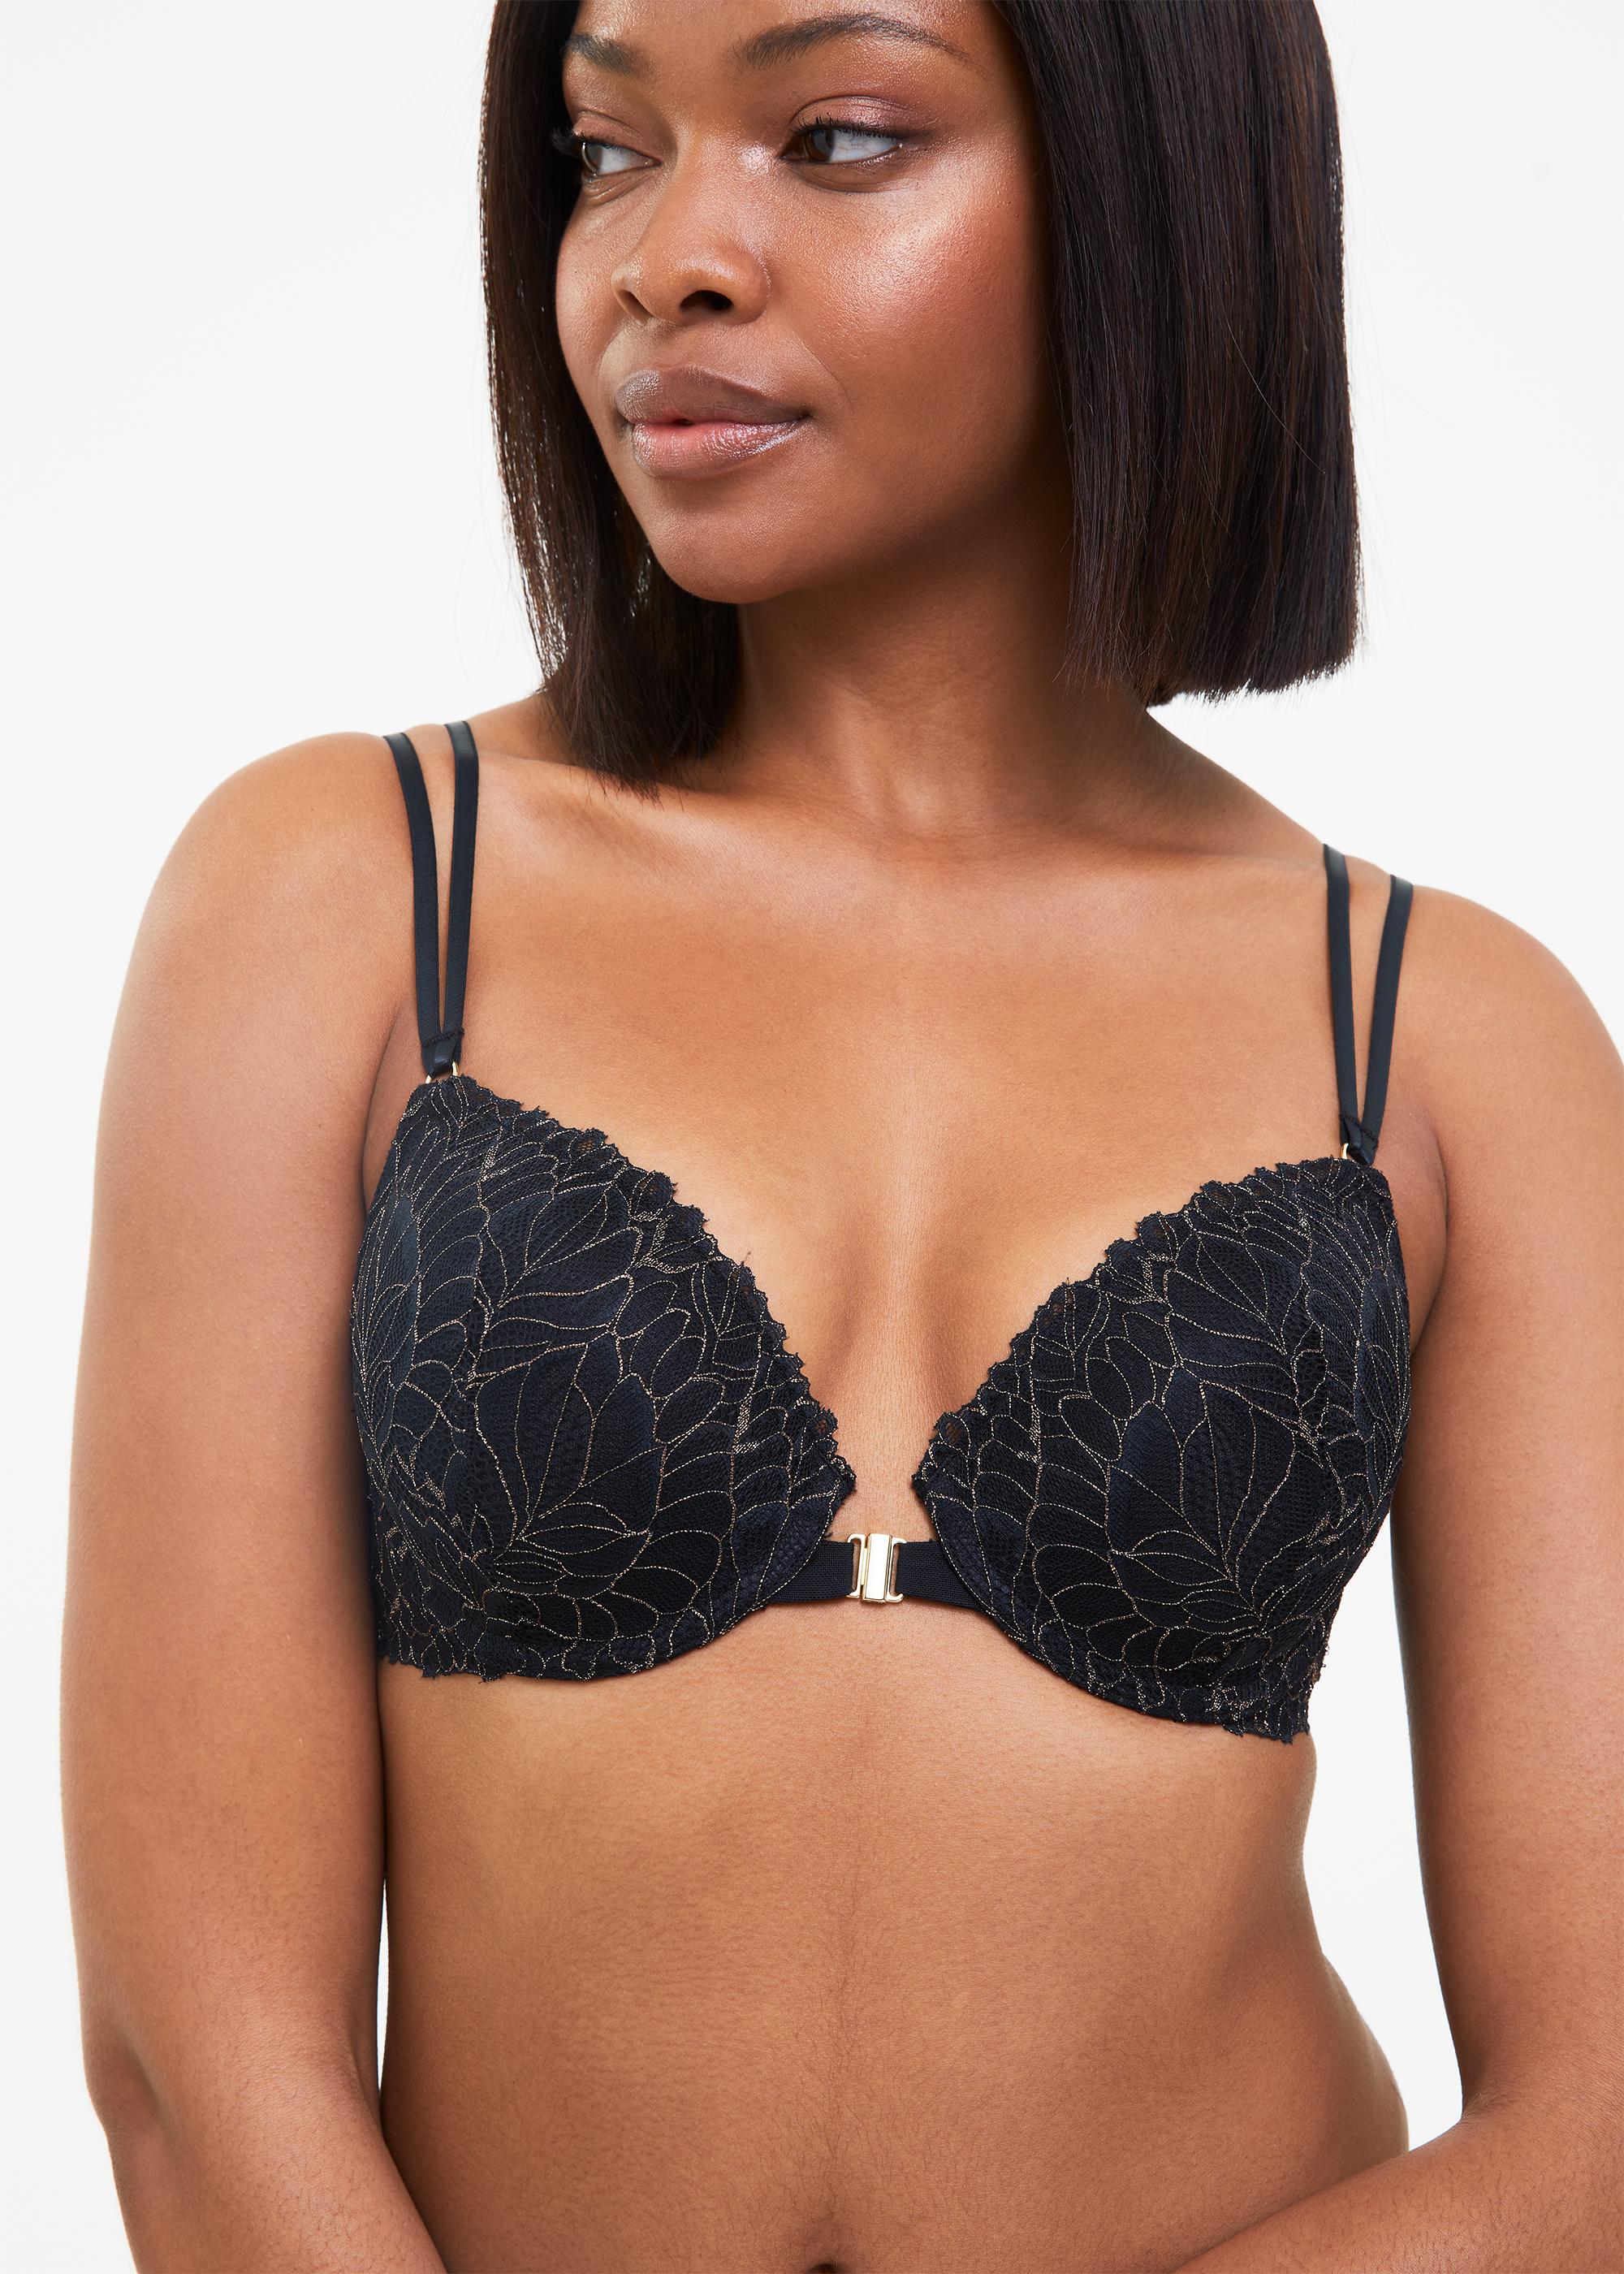 Lace Bralettes for Women Girls Padded Plus Size Push Up Spaghetti